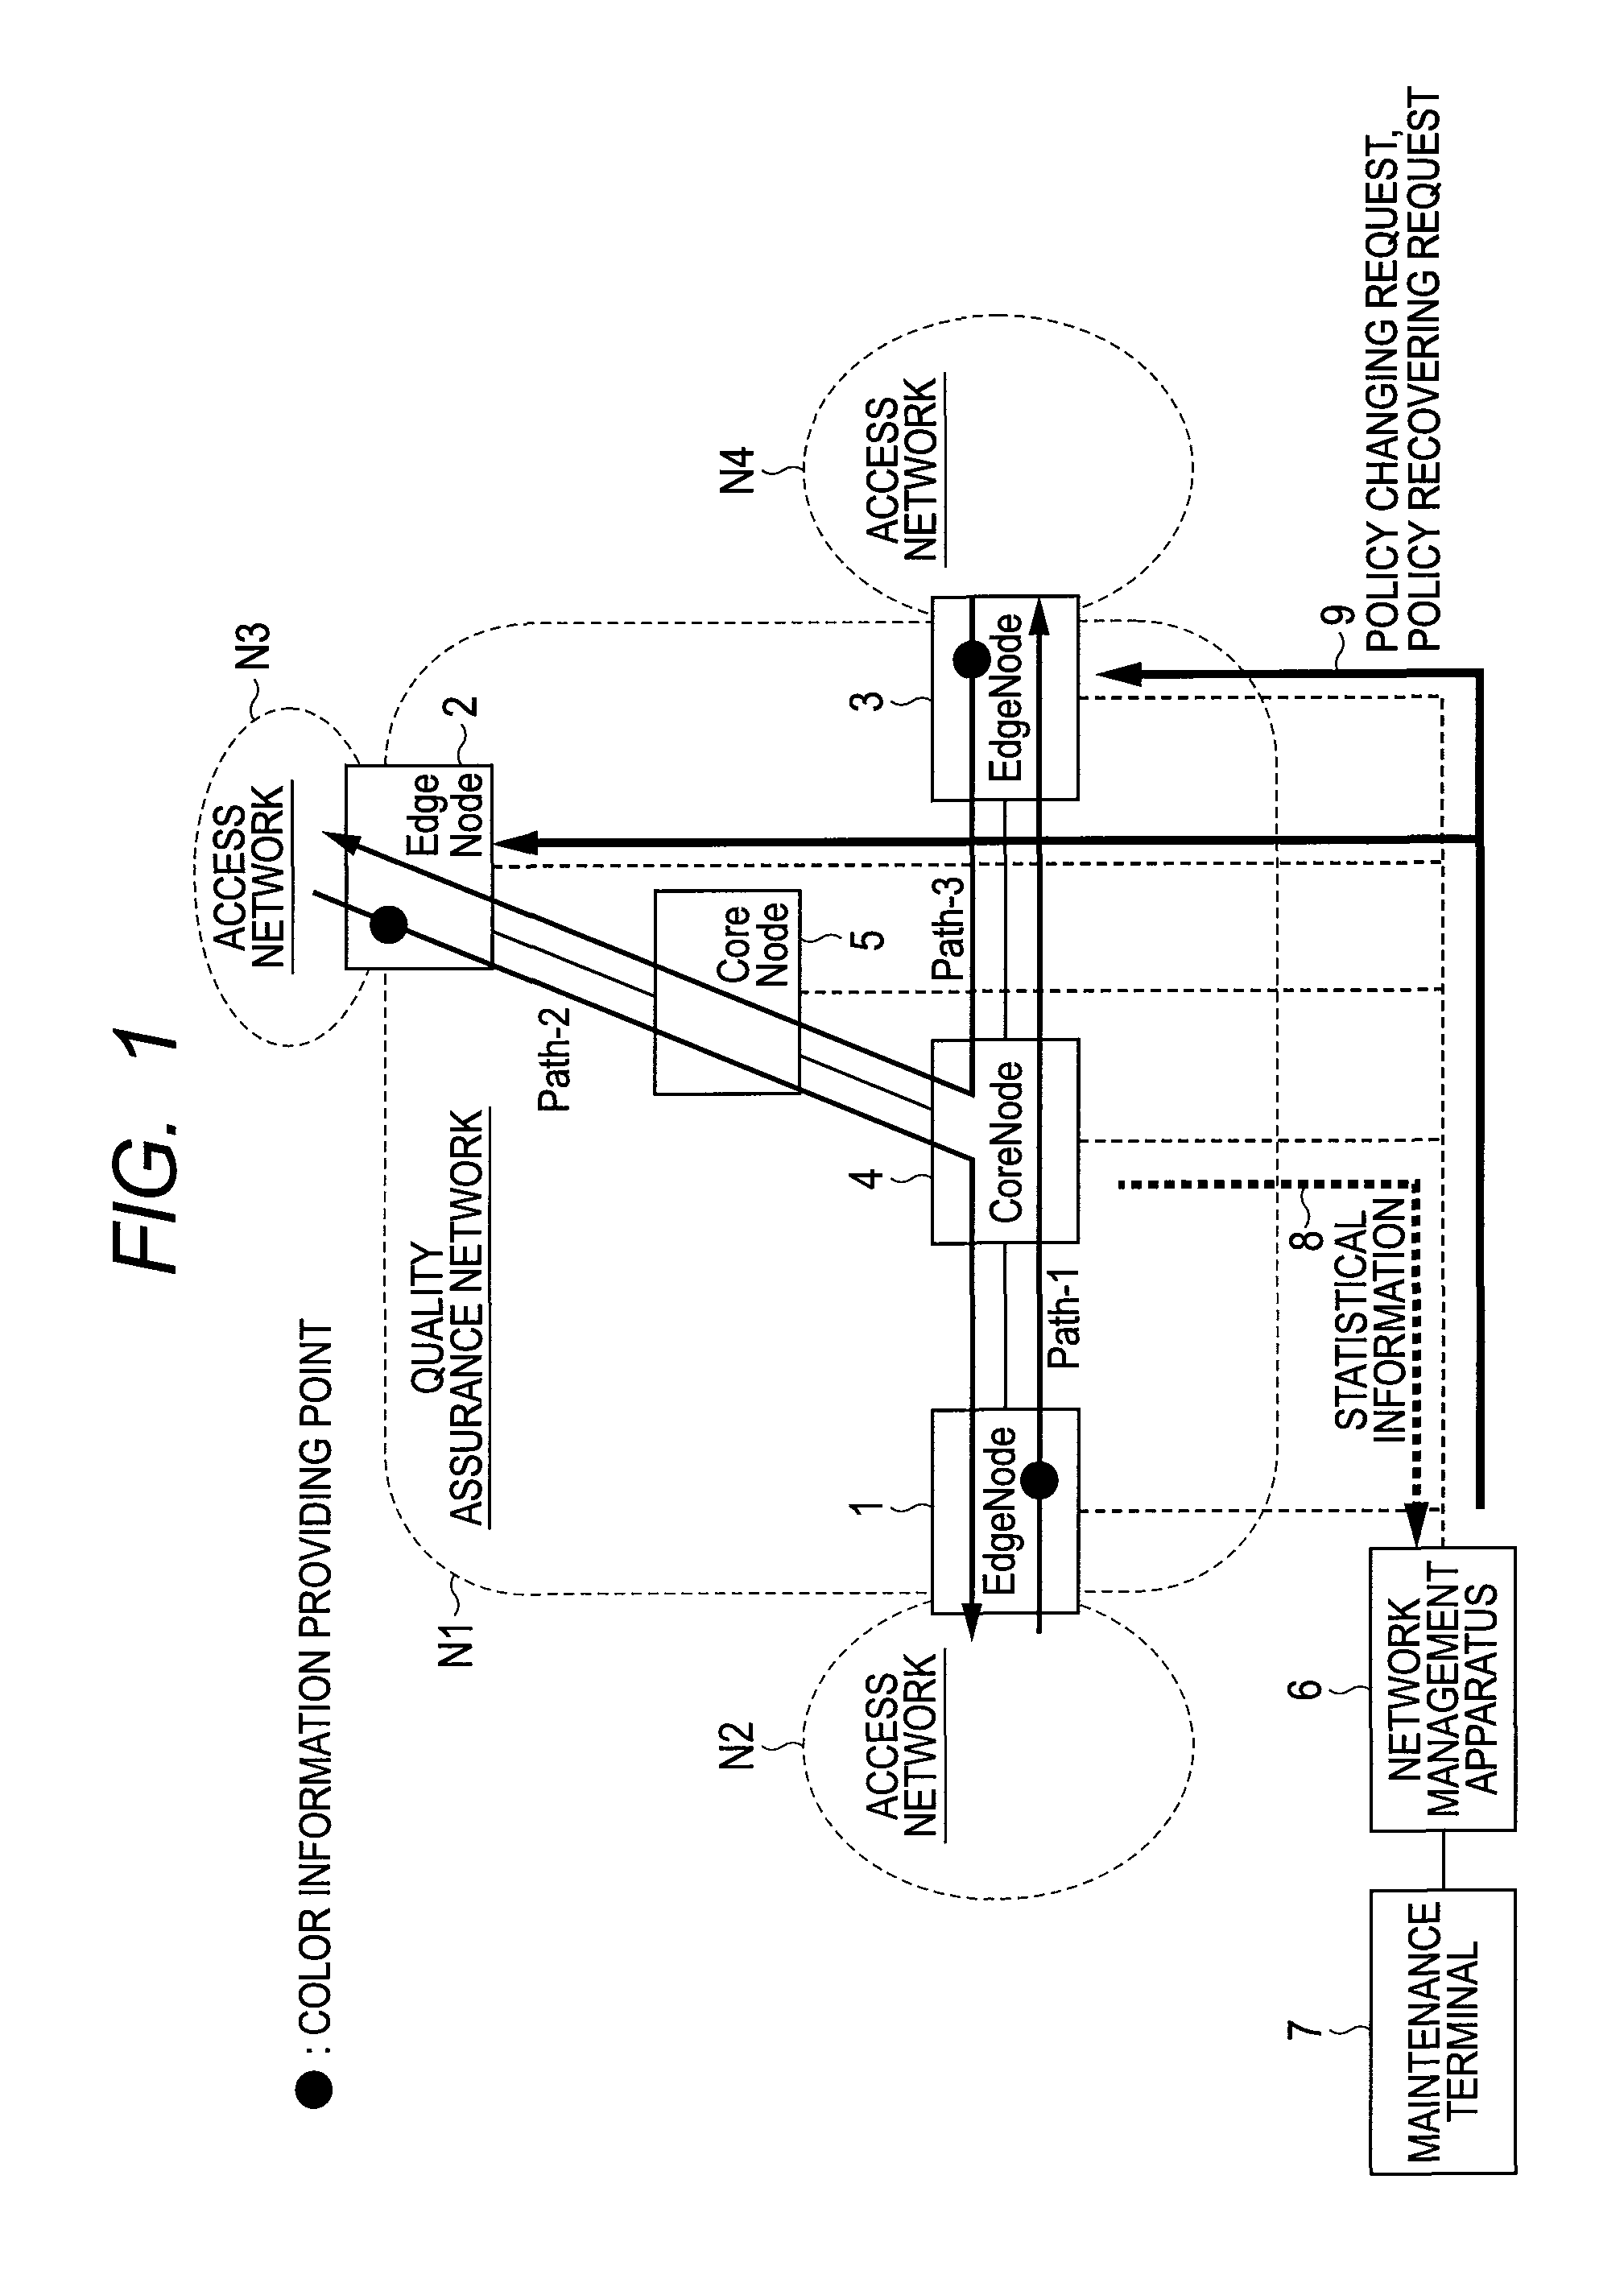 Packet transfer system, network management apparatus, and edge node